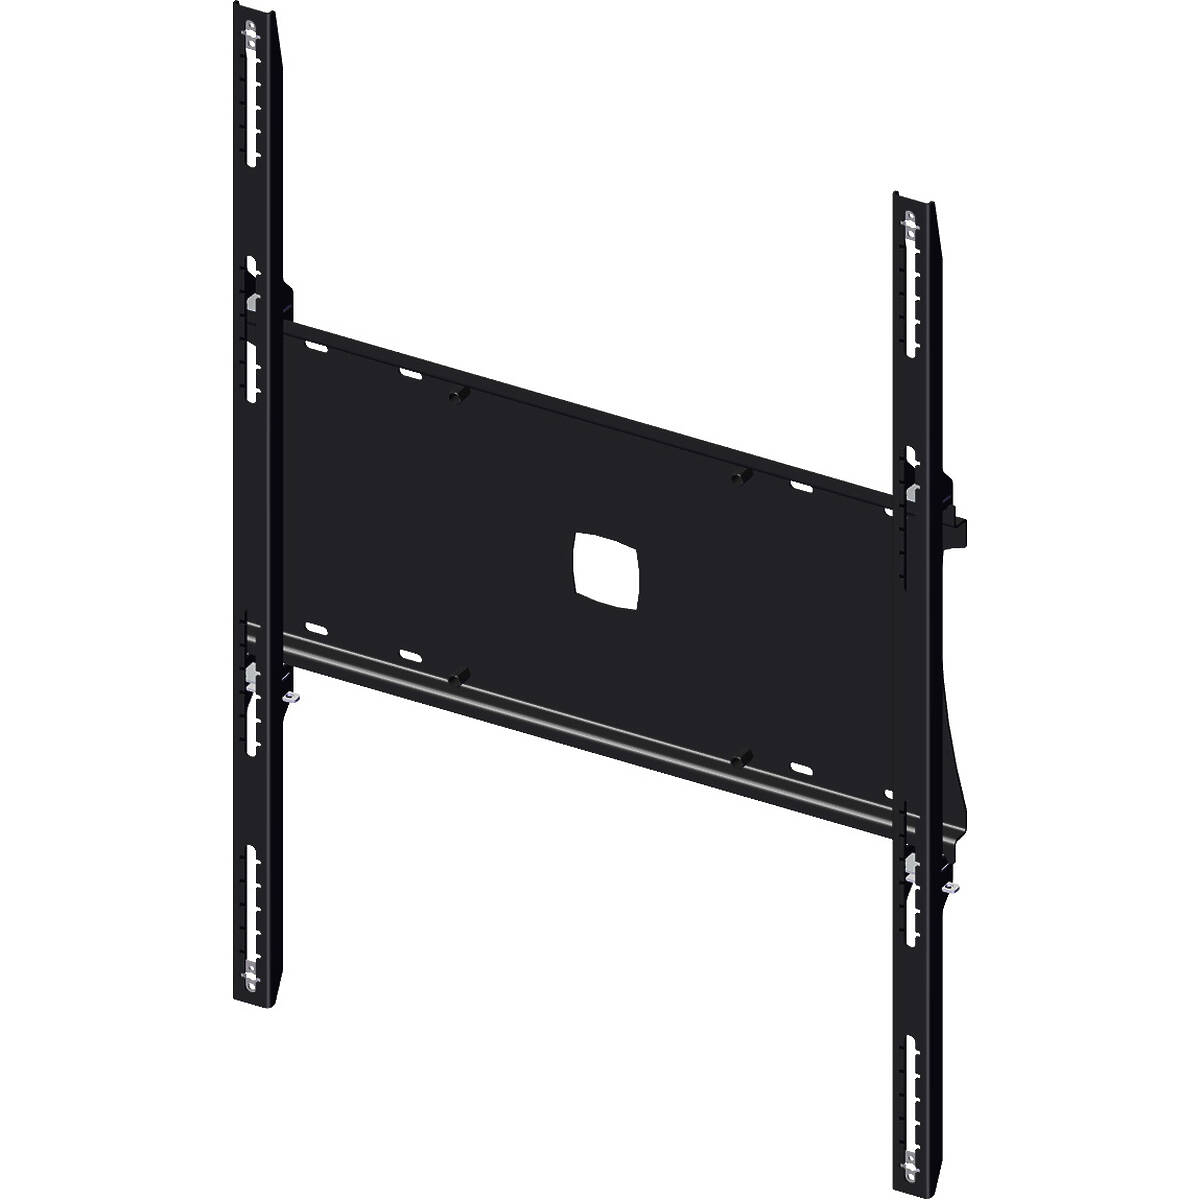 Unicol PPZX9 Pozimount flat portrait wall bracket for LCD/plasma screens from 71 to 110" product image. Click to enlarge.